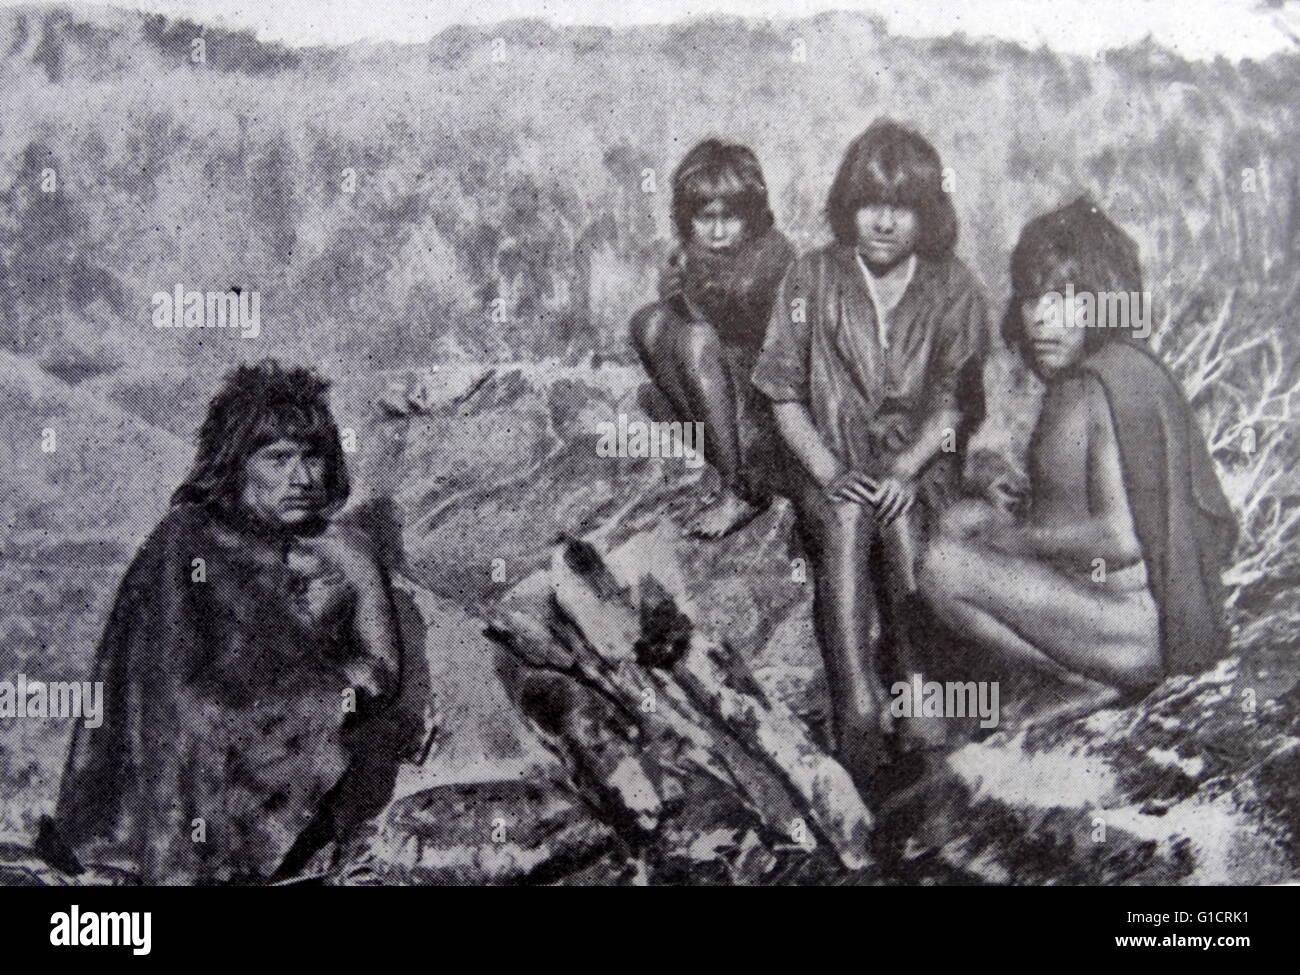 Native Indians from Tierra del Fuego; 1920. Tierra del Fuego is an archipelago off the southernmost tip of the South American mainland; Stock Photo